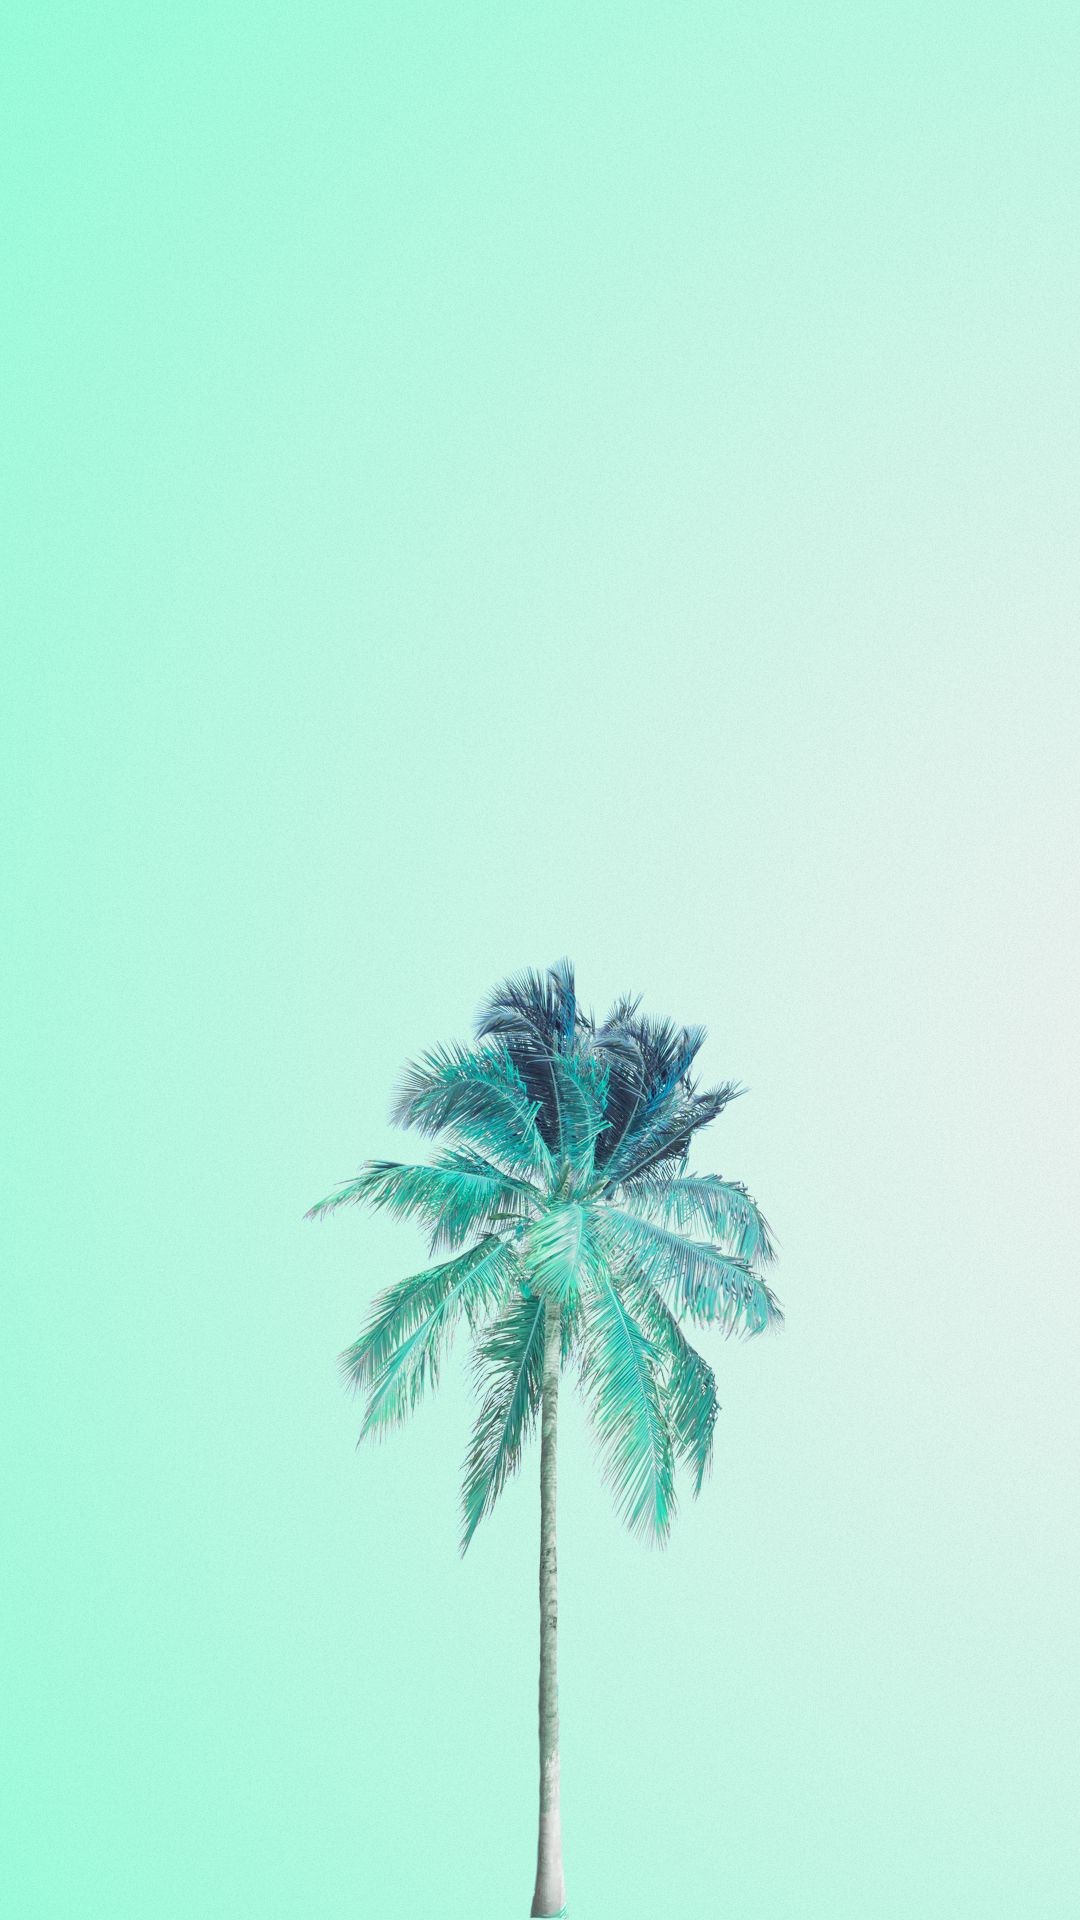 Blue and Green iPhone Wallpaper with resolution 1080X1920 pixel. You can make this wallpaper for your iPhone 5, 6, 7, 8, X backgrounds, Mobile Screensaver, or iPad Lock Screen